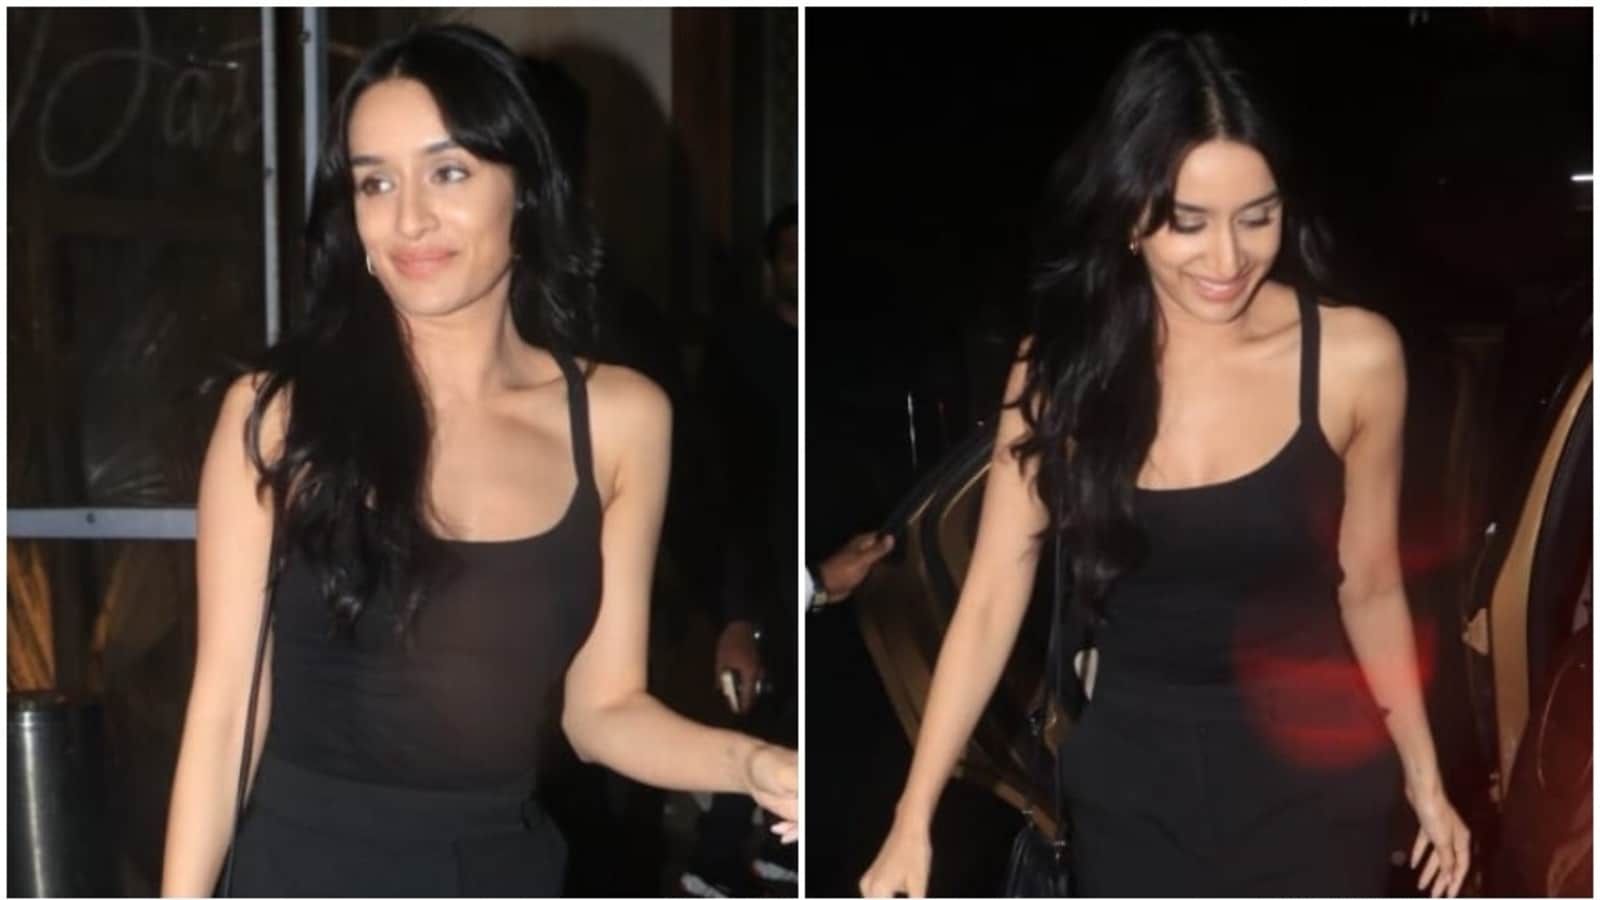 Shraddha Kapoor X X X - Shraddha Kapoor in black tank top and satin pants pulls off effortless  girl-next-door look: See pics and video | Fashion Trends - Hindustan Times